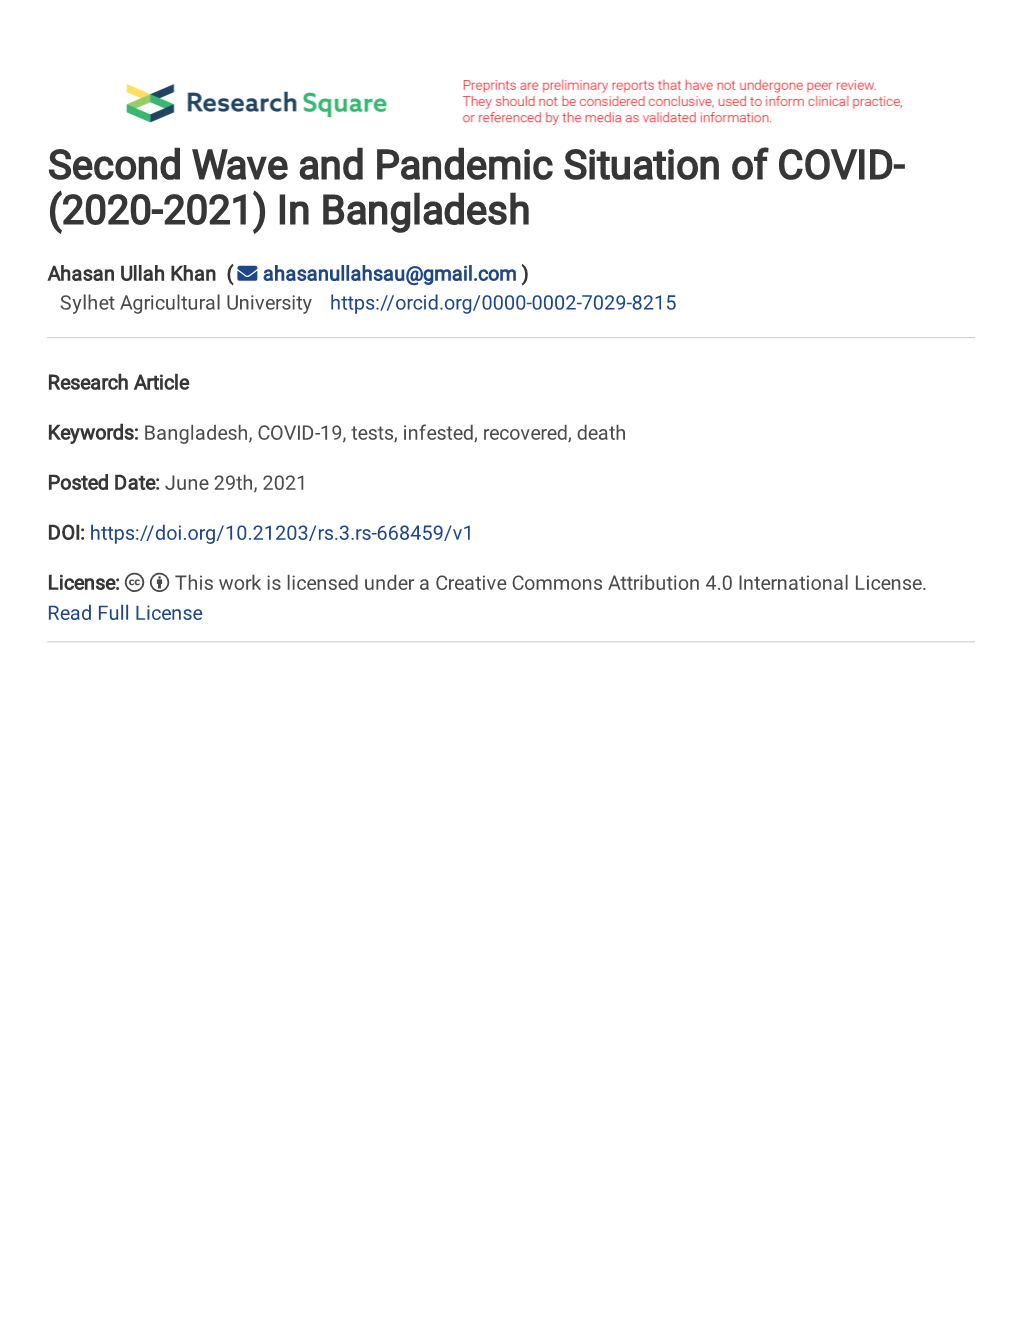 Second Wave and Pandemic Situation of COVID- (2020-2021) in Bangladesh